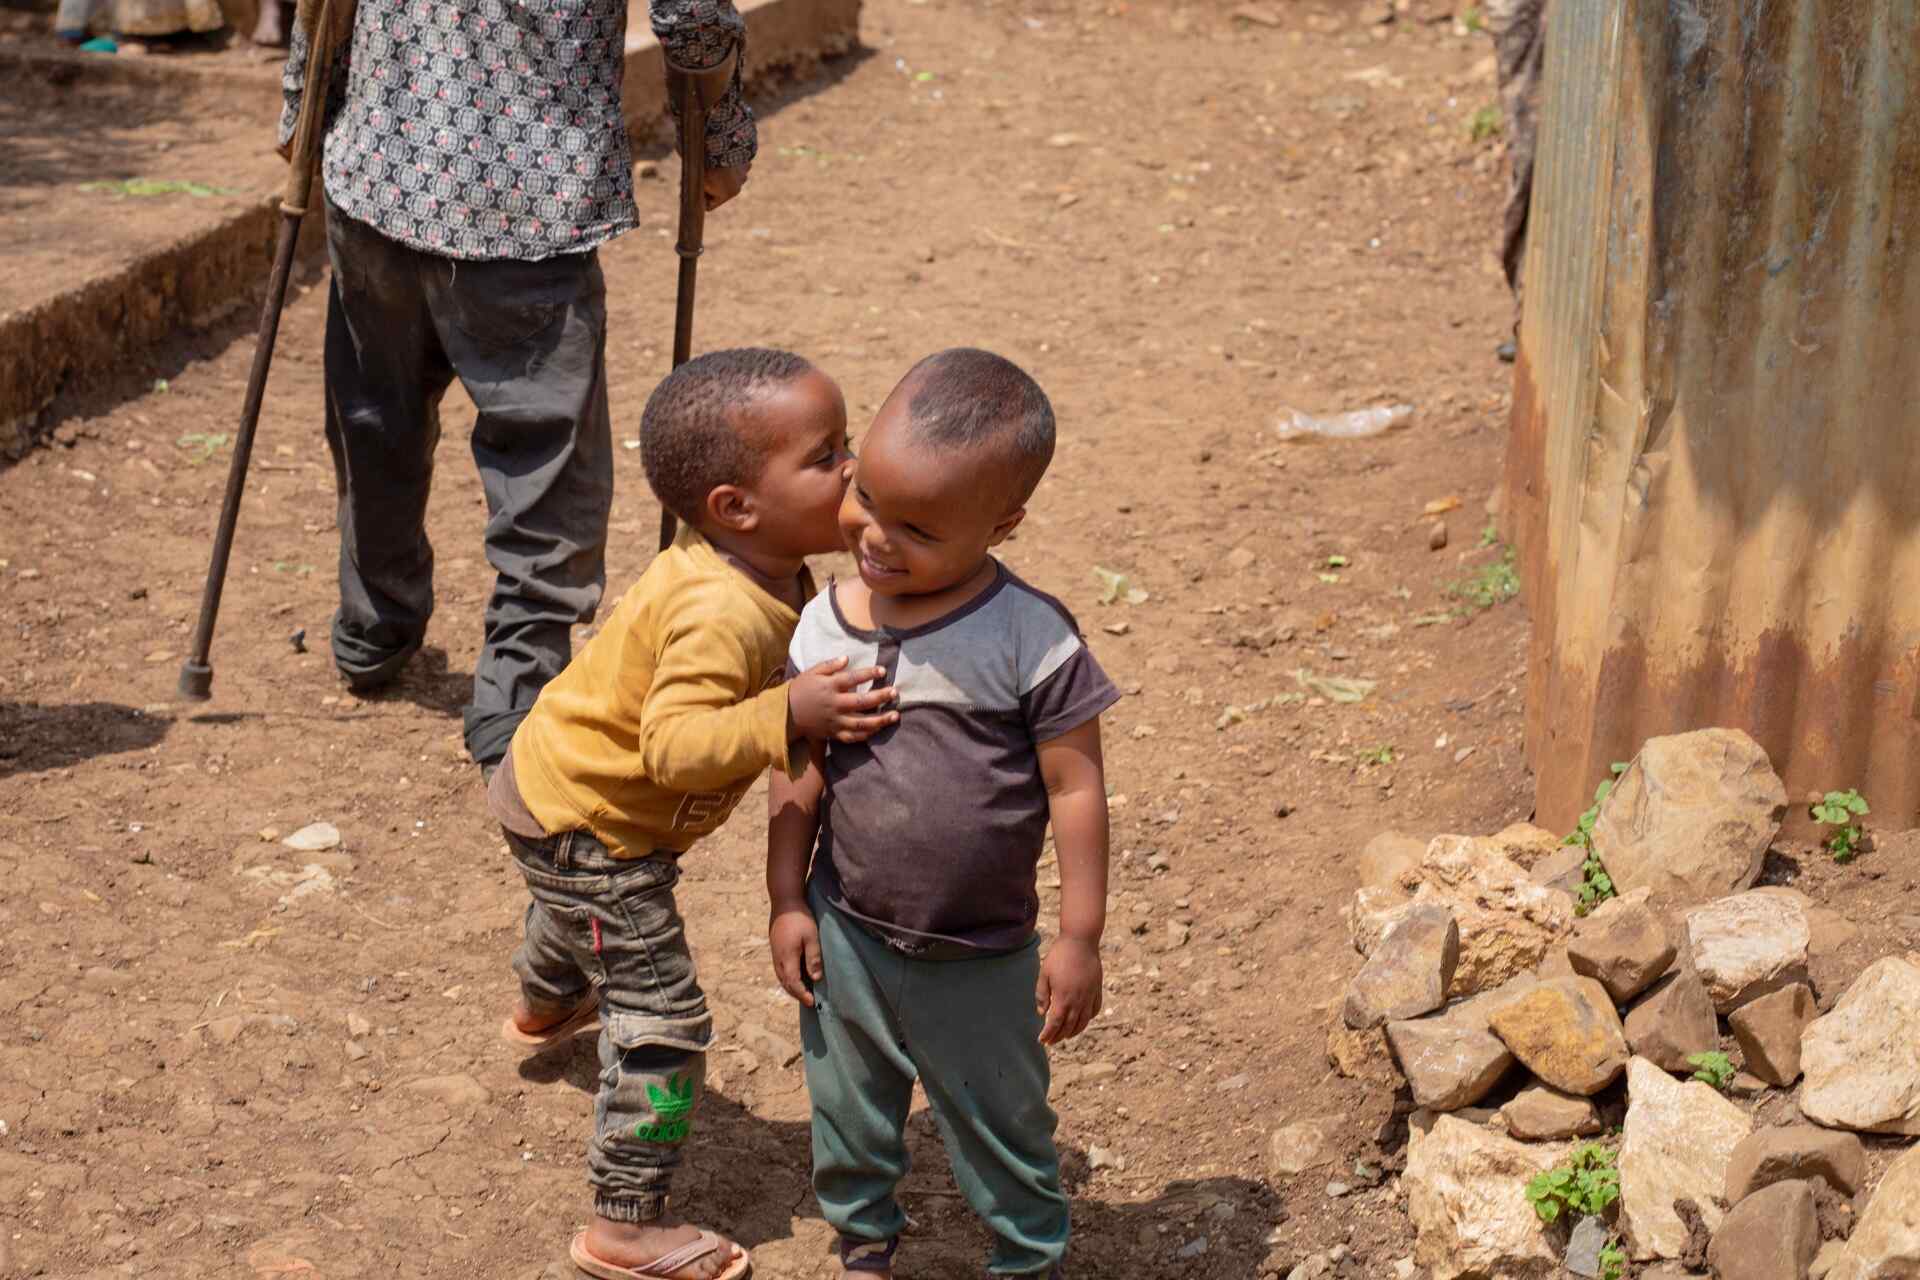 Two young children in Ethiopia embrace outside. They smile together.